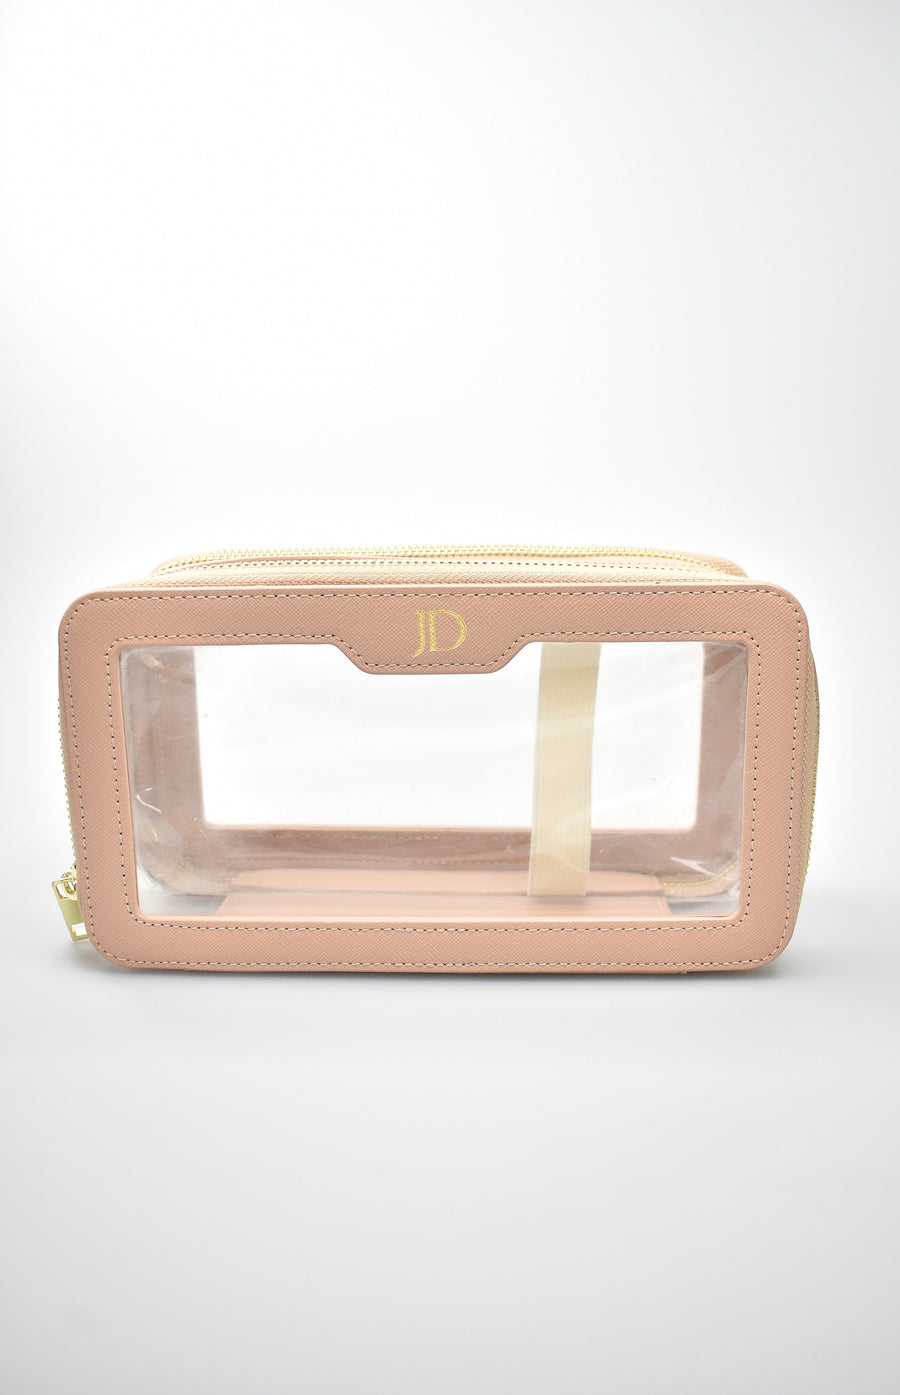 Personalised Leather Clear Makeup Bag - Sandy Beige